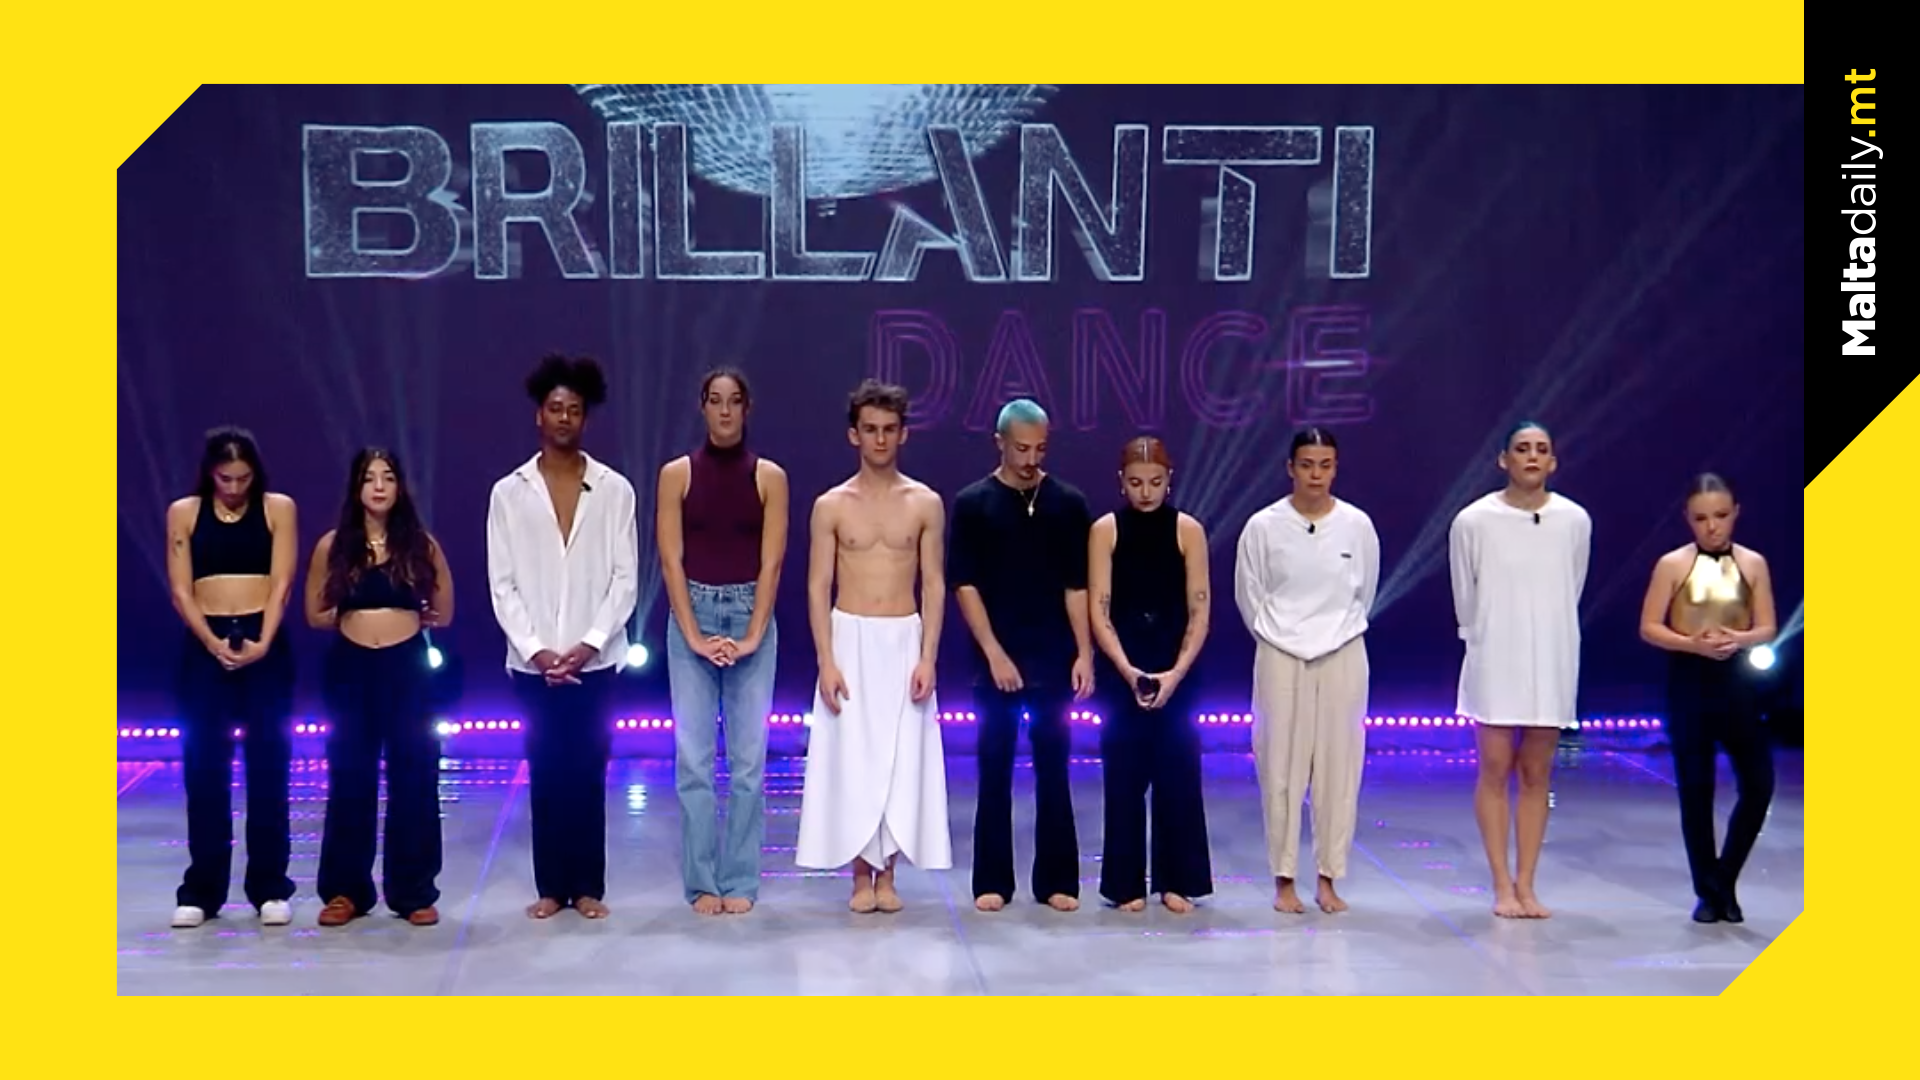 Here are your official Brillanti Dance Finalists